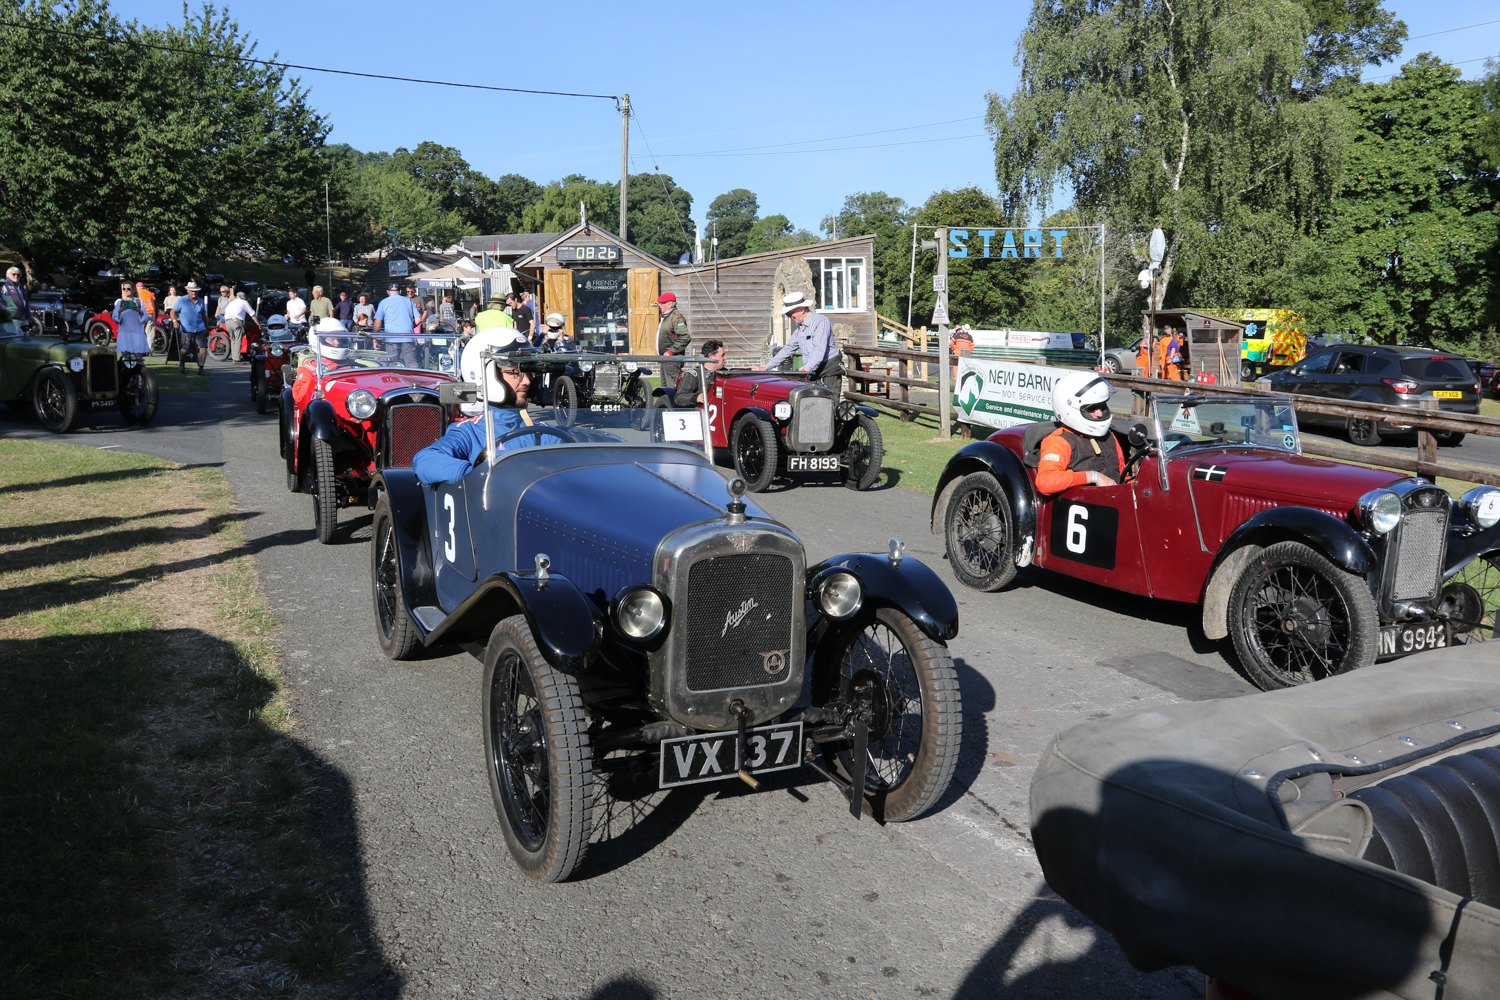 AUSTIN SEVENS LINE UP FOR RUNS IN THEIR ANNIVERSARY YEAR. Picasa